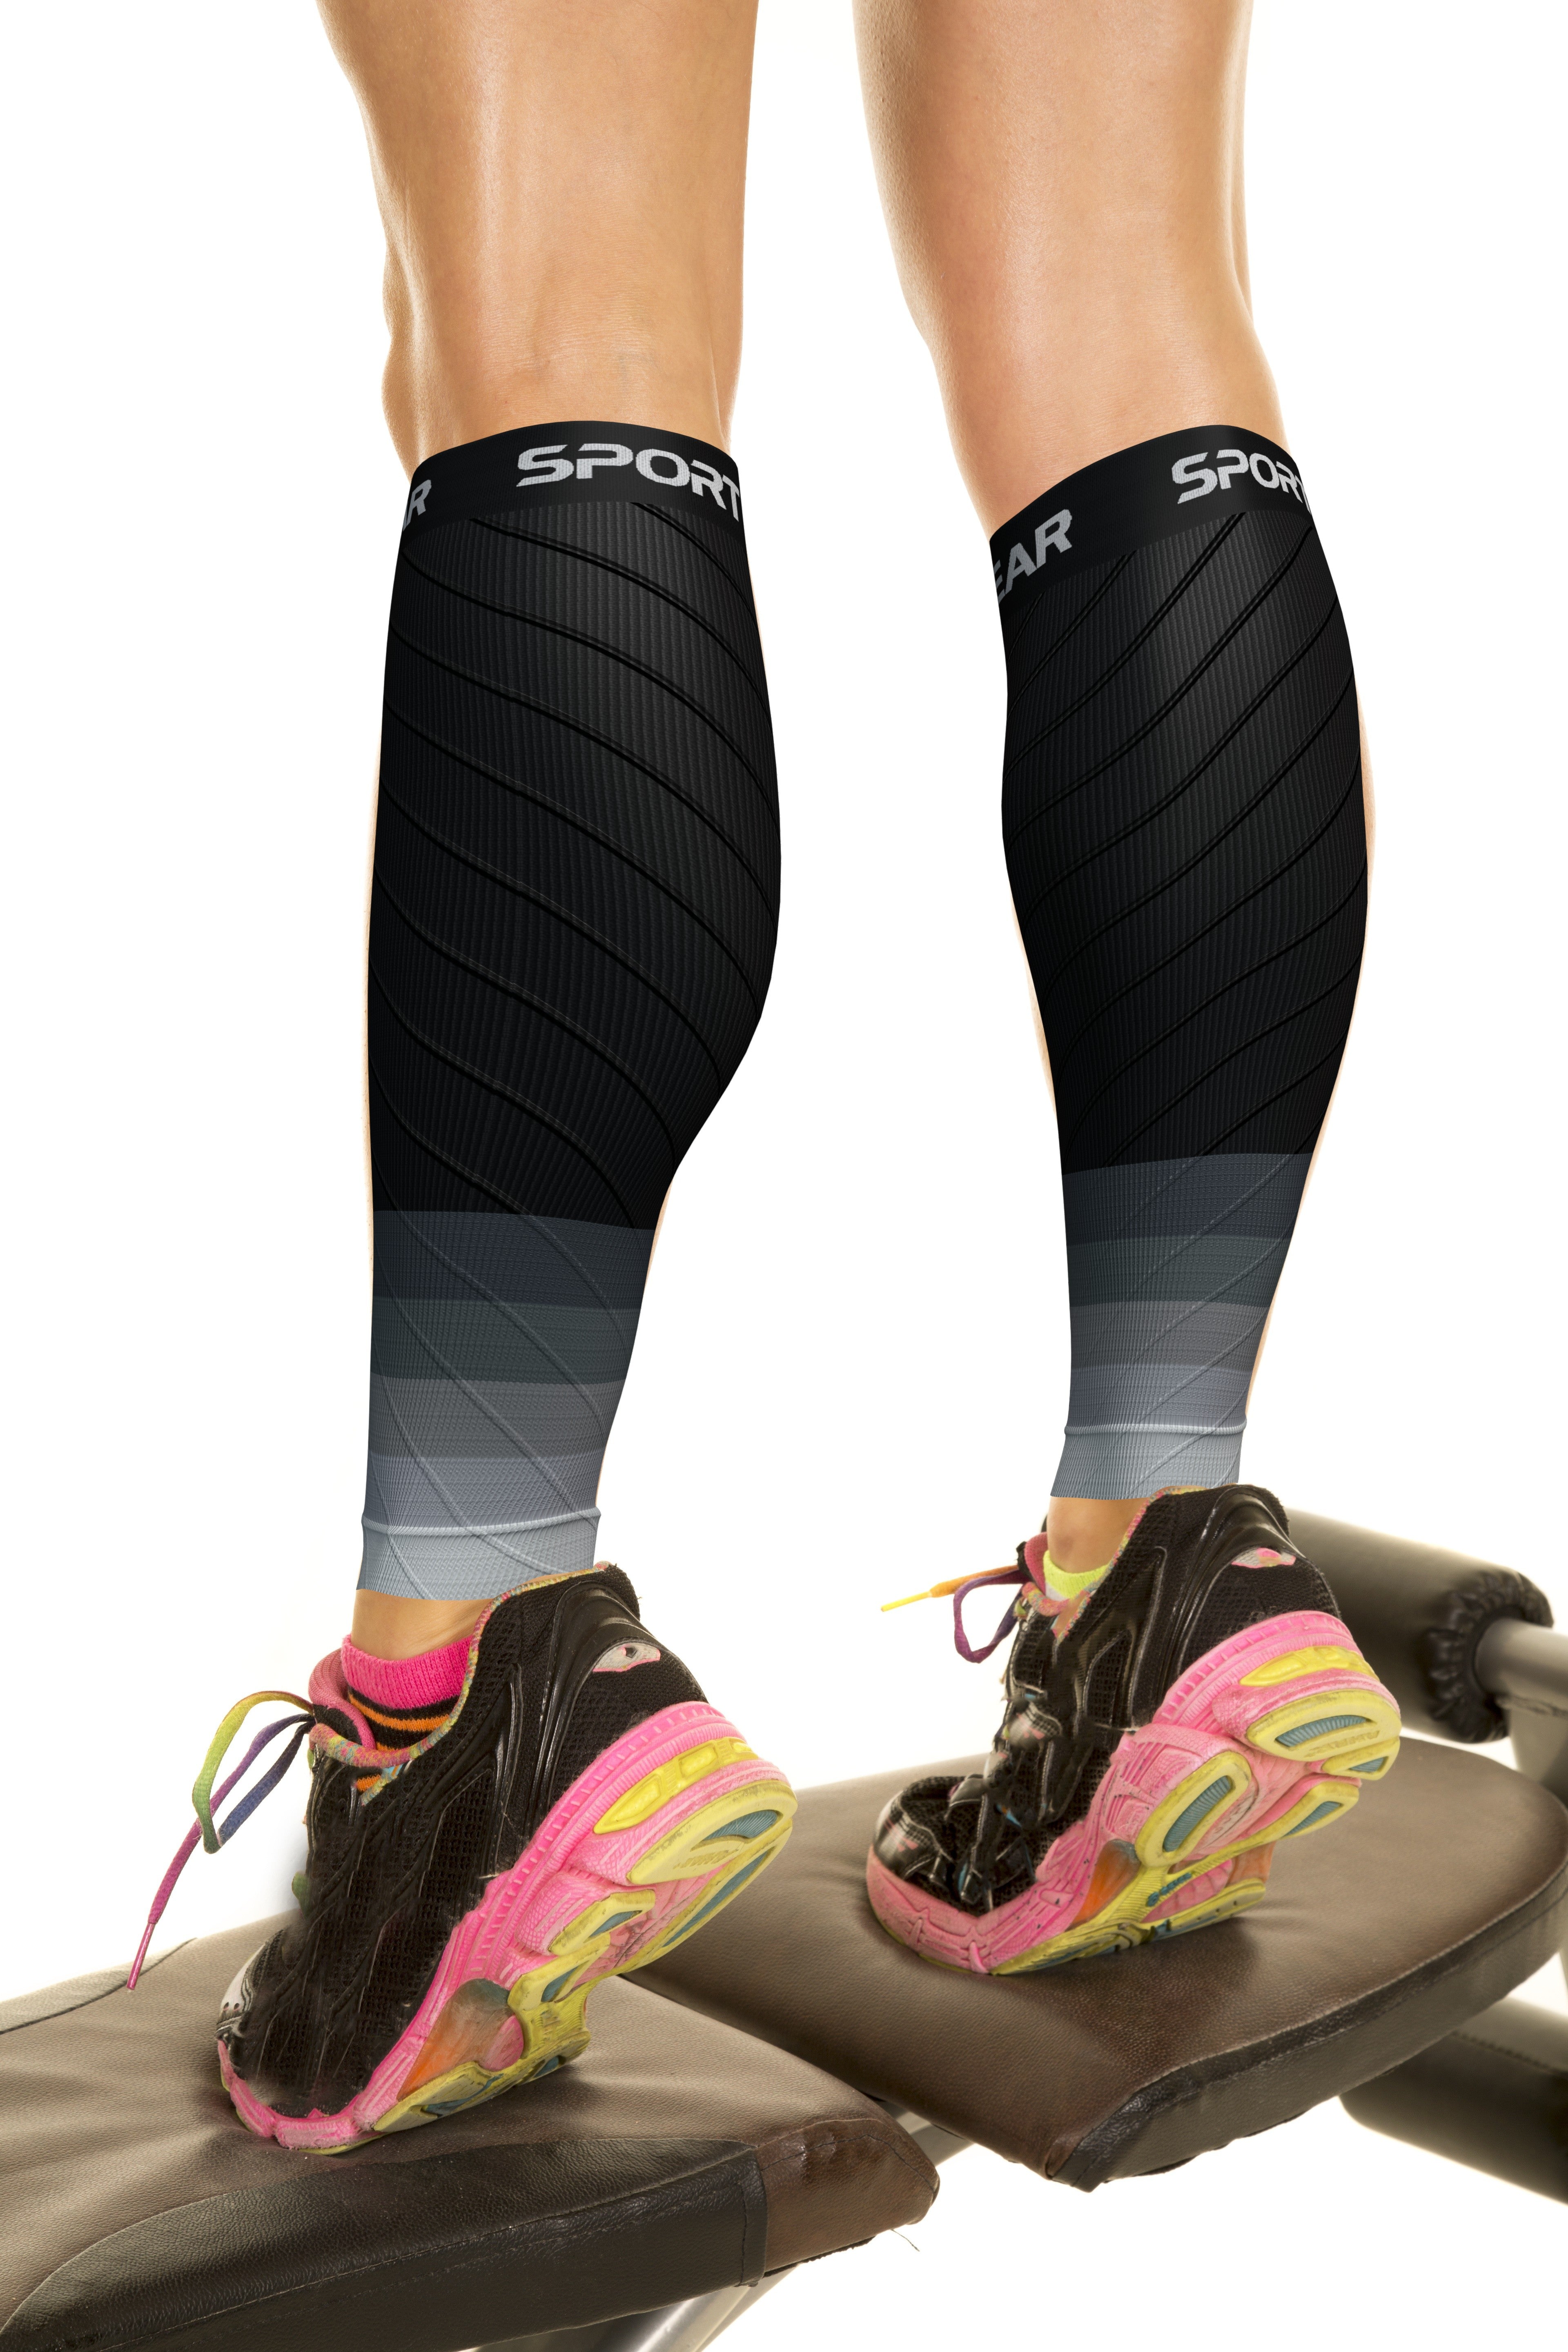 Physix Gear Sport 3 Pairs of Compression Socks for UAE